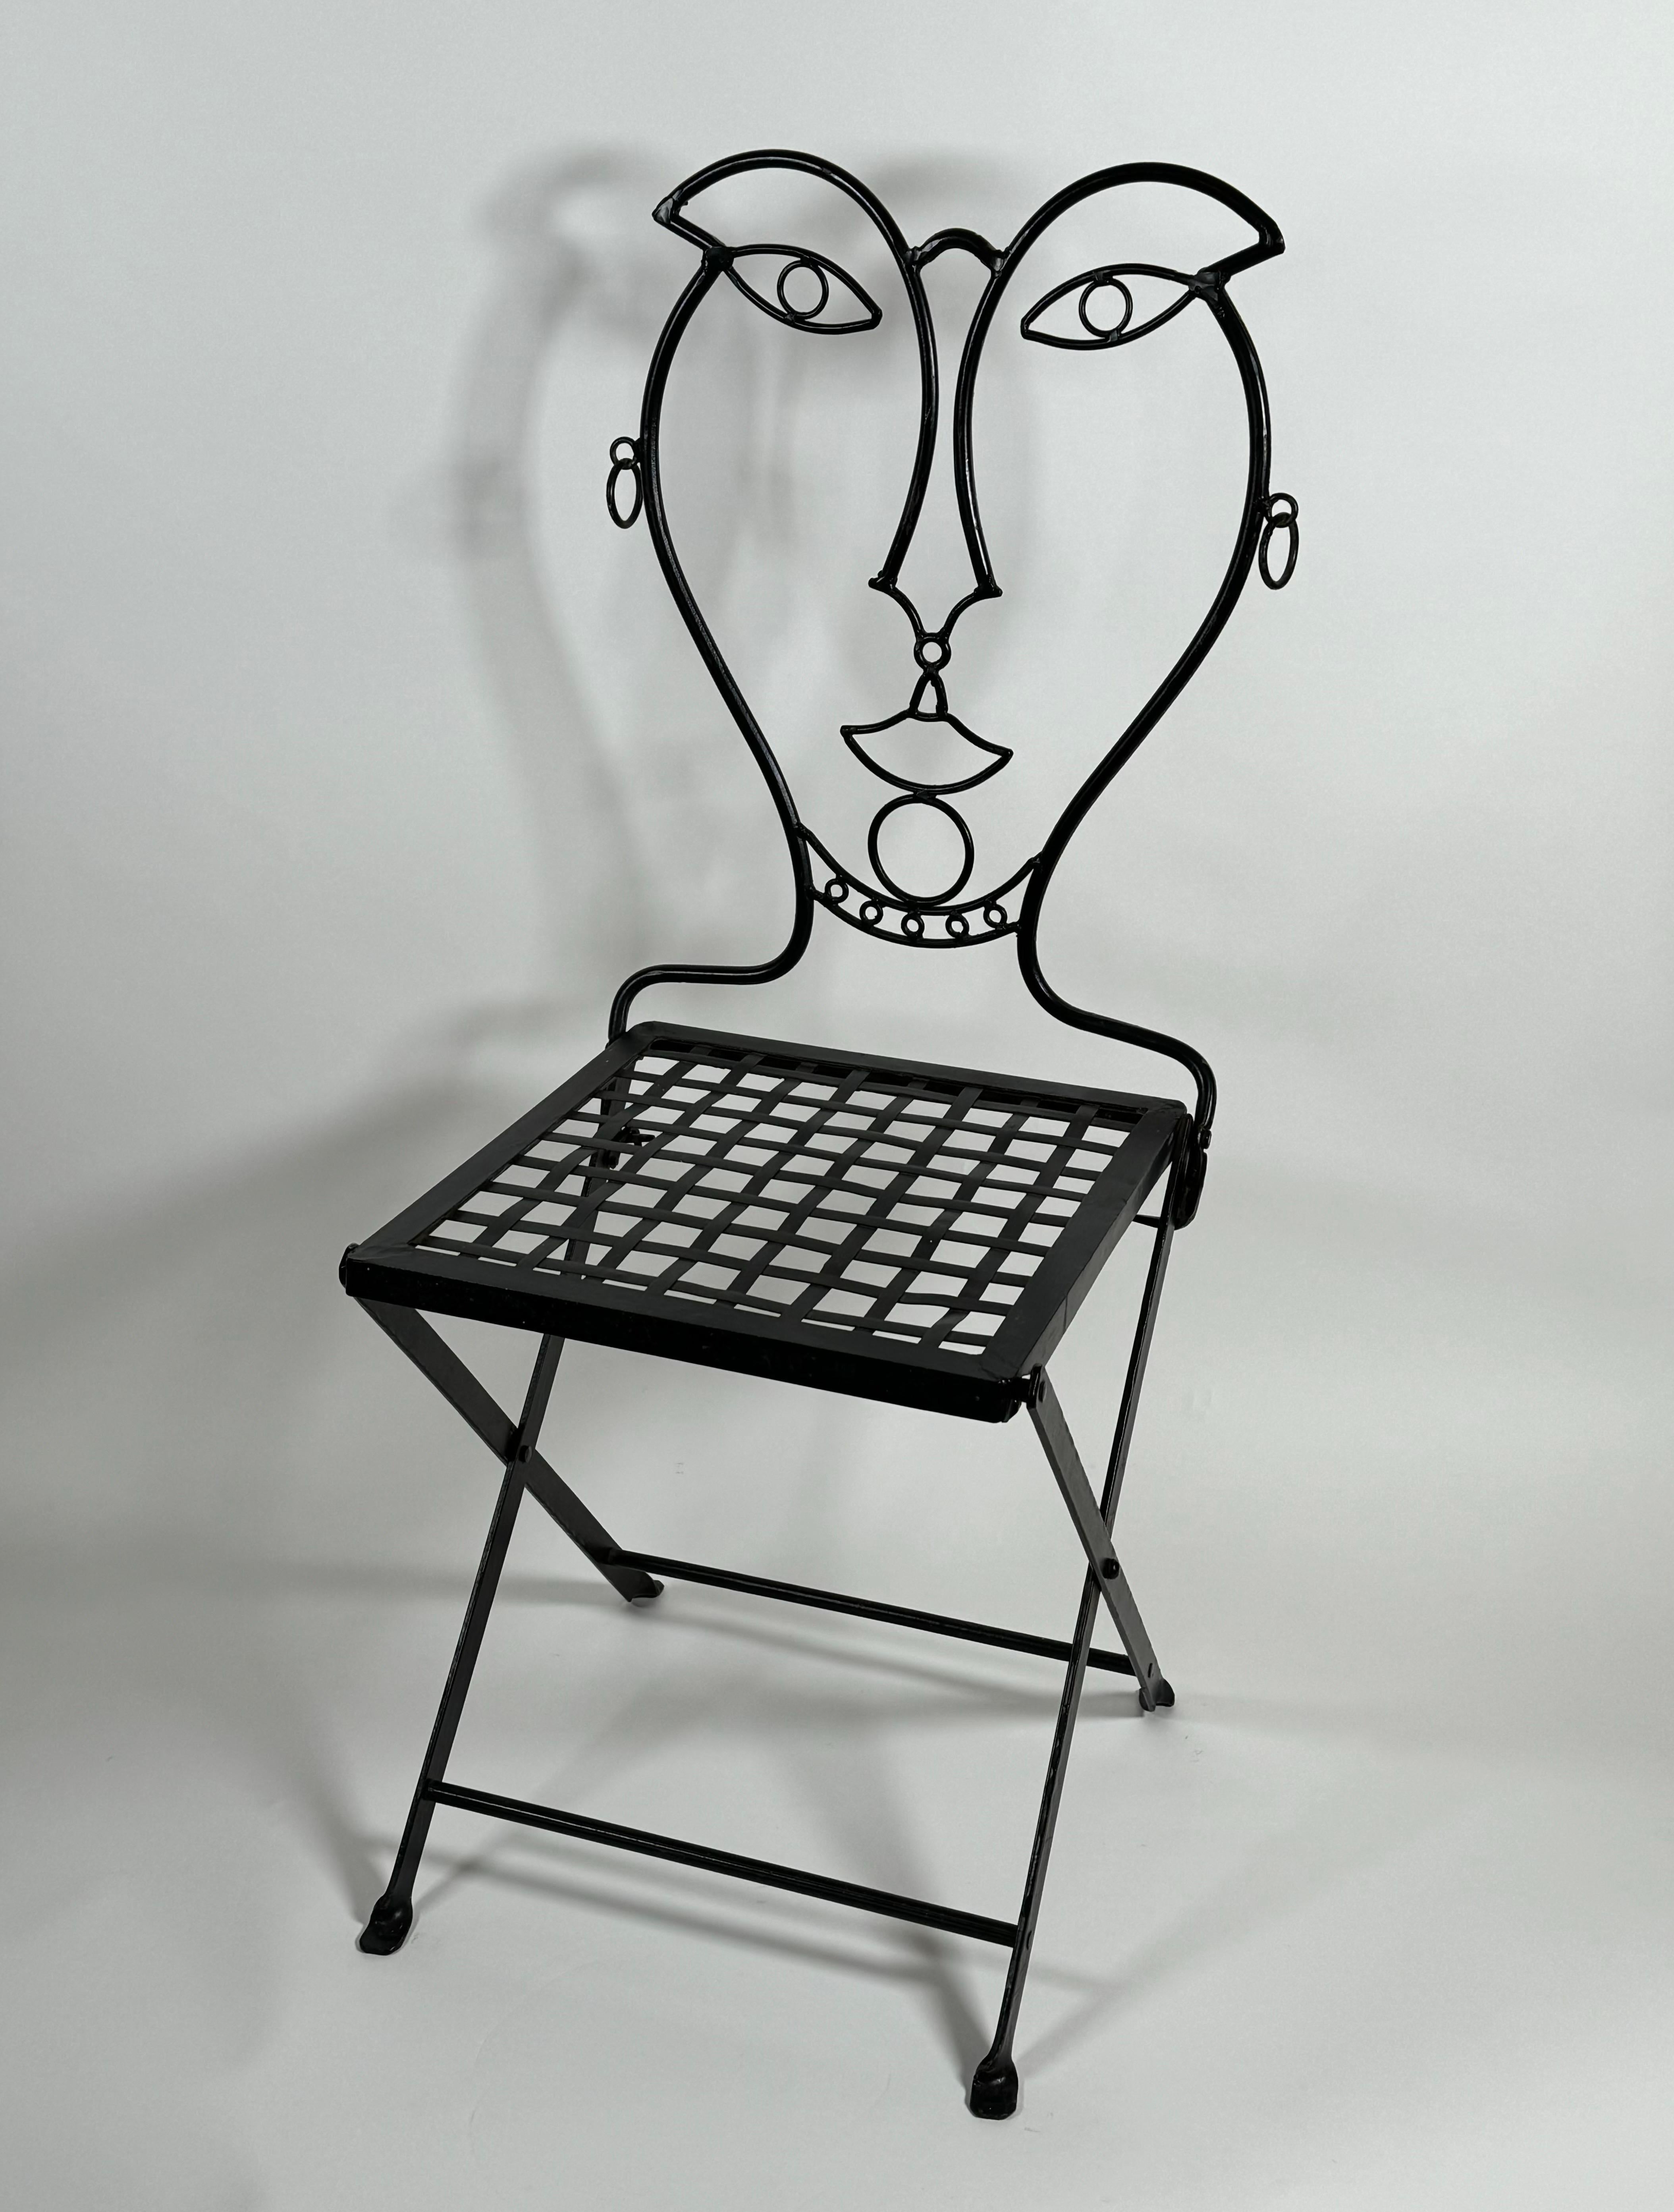 Folding handmade black painted iron chair from Mexico, the welded chair has a figurative abstract face for the seat back with loose earrings creating a whimsical chair for the patio in the garden or in a kitchen nook. The iron seat is an  lattice